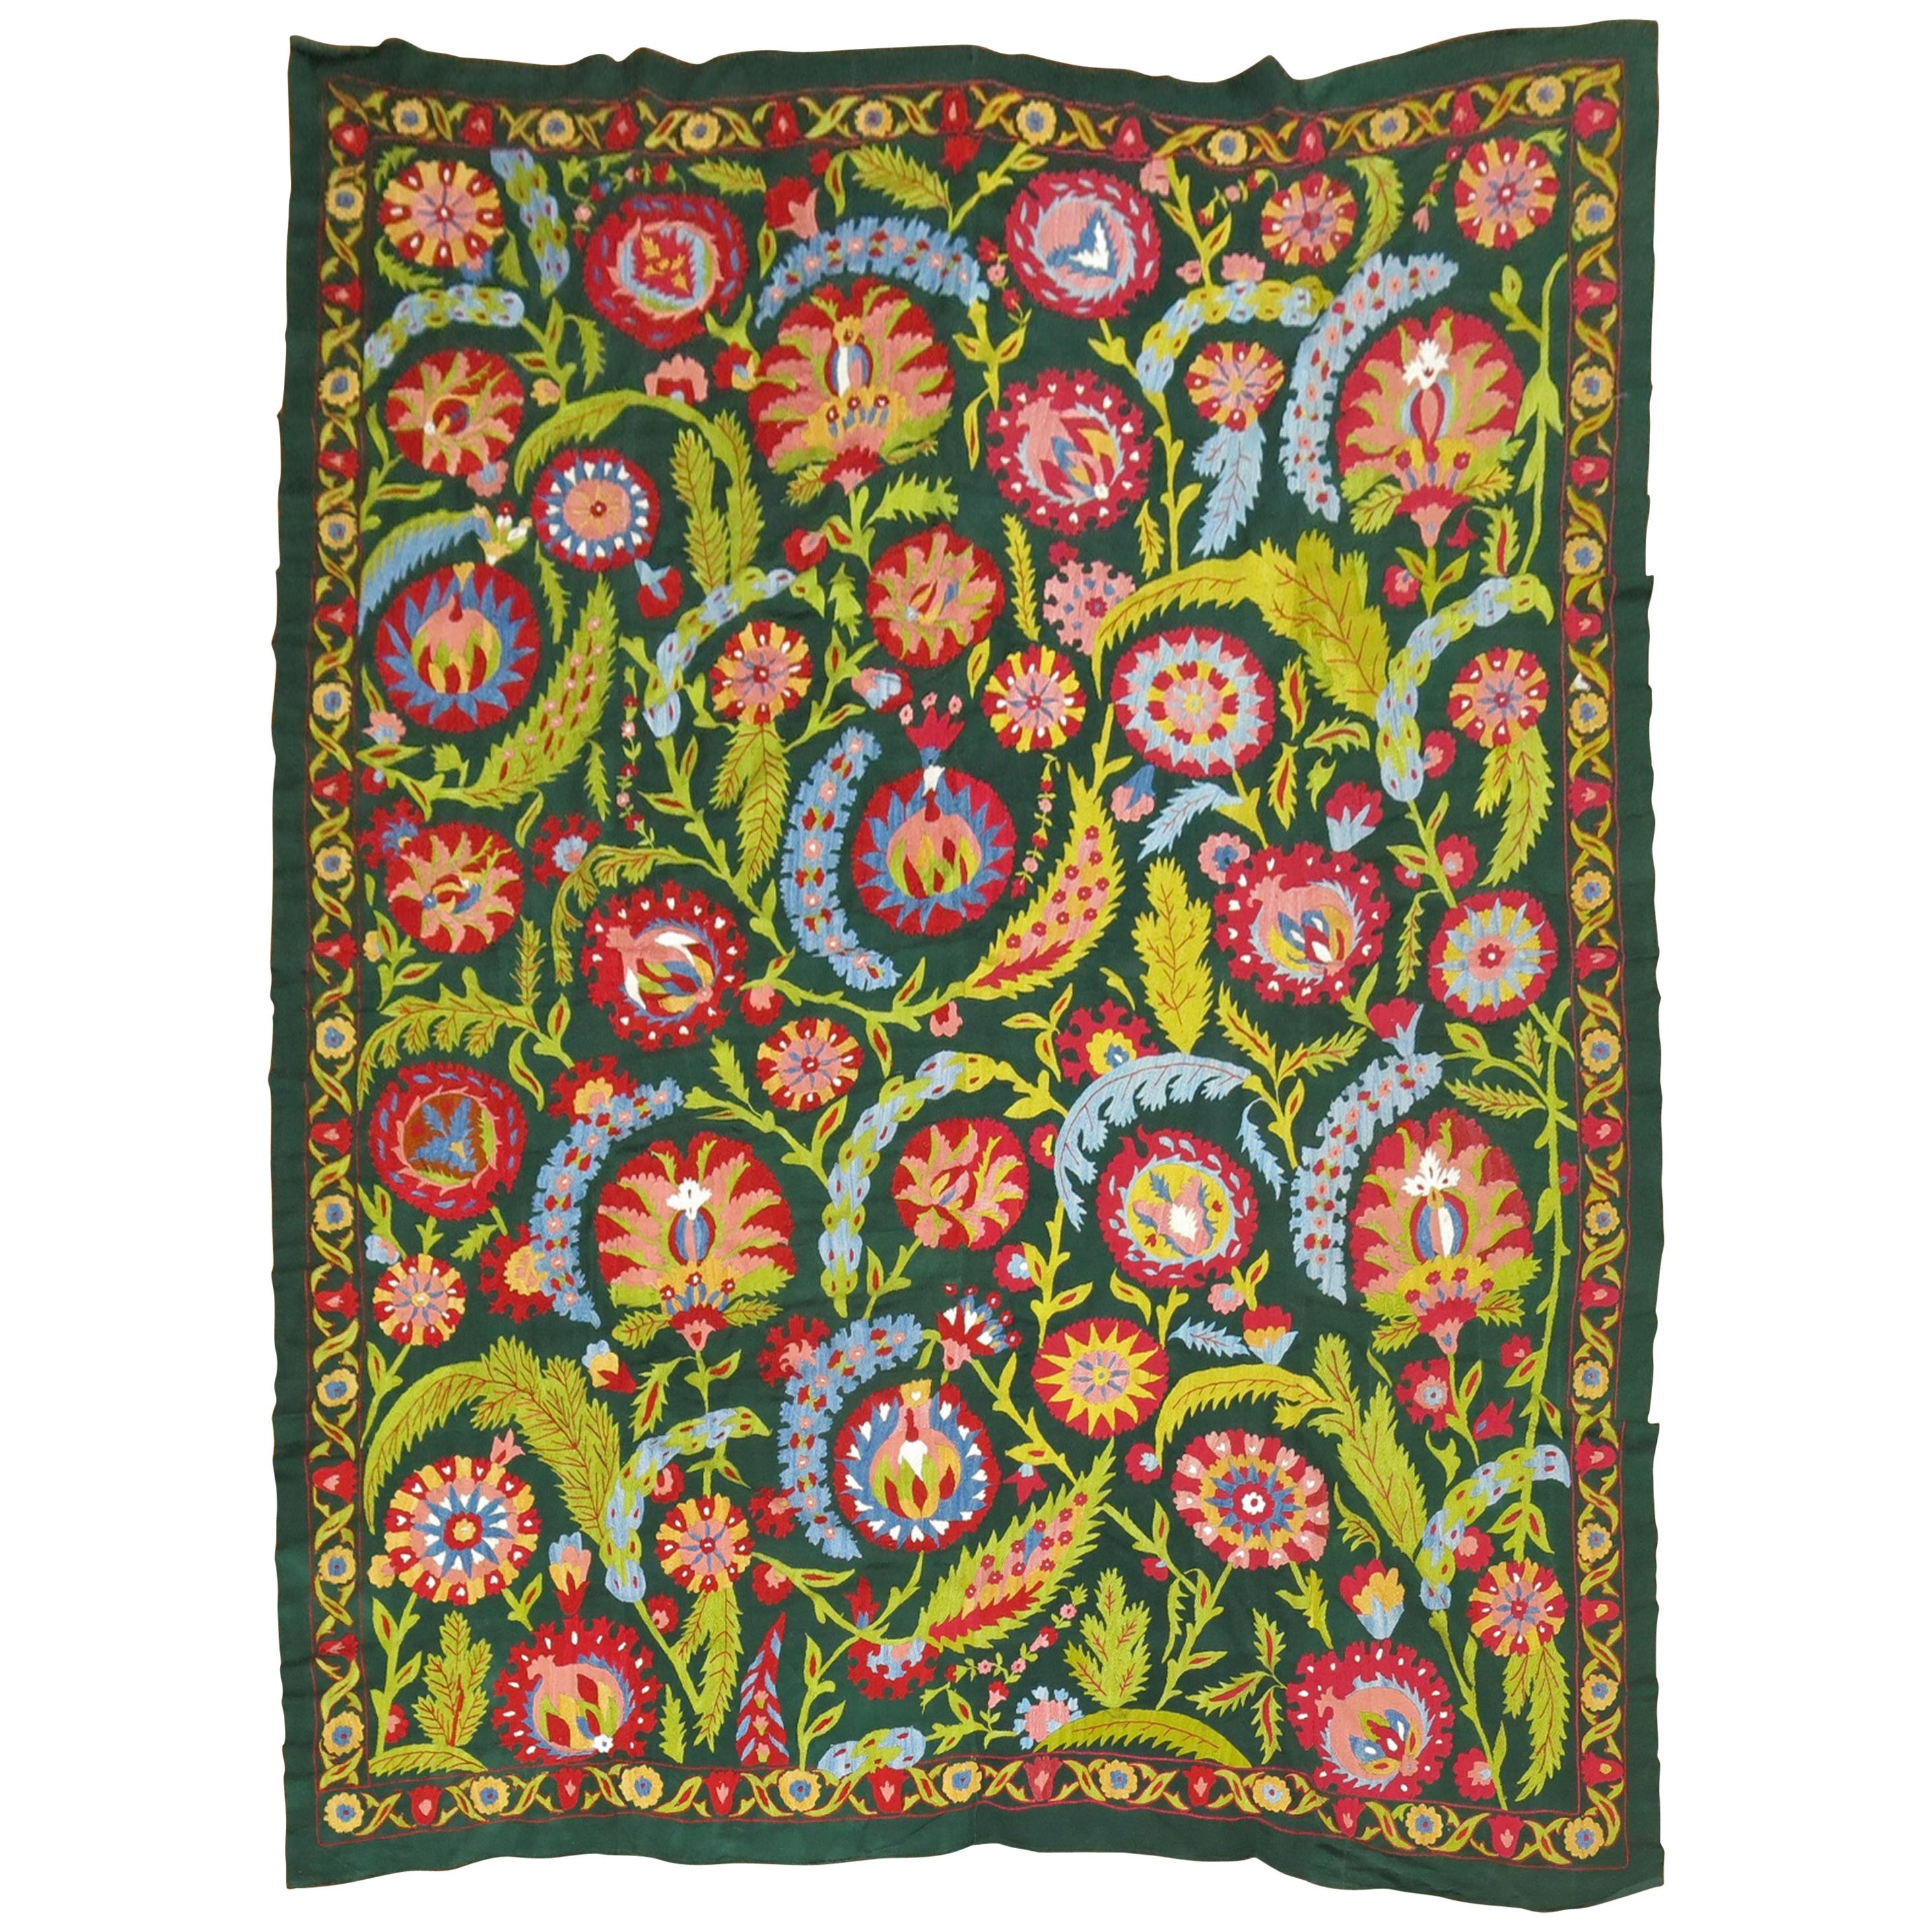 Colorful Vintage Suzanni Embroidery